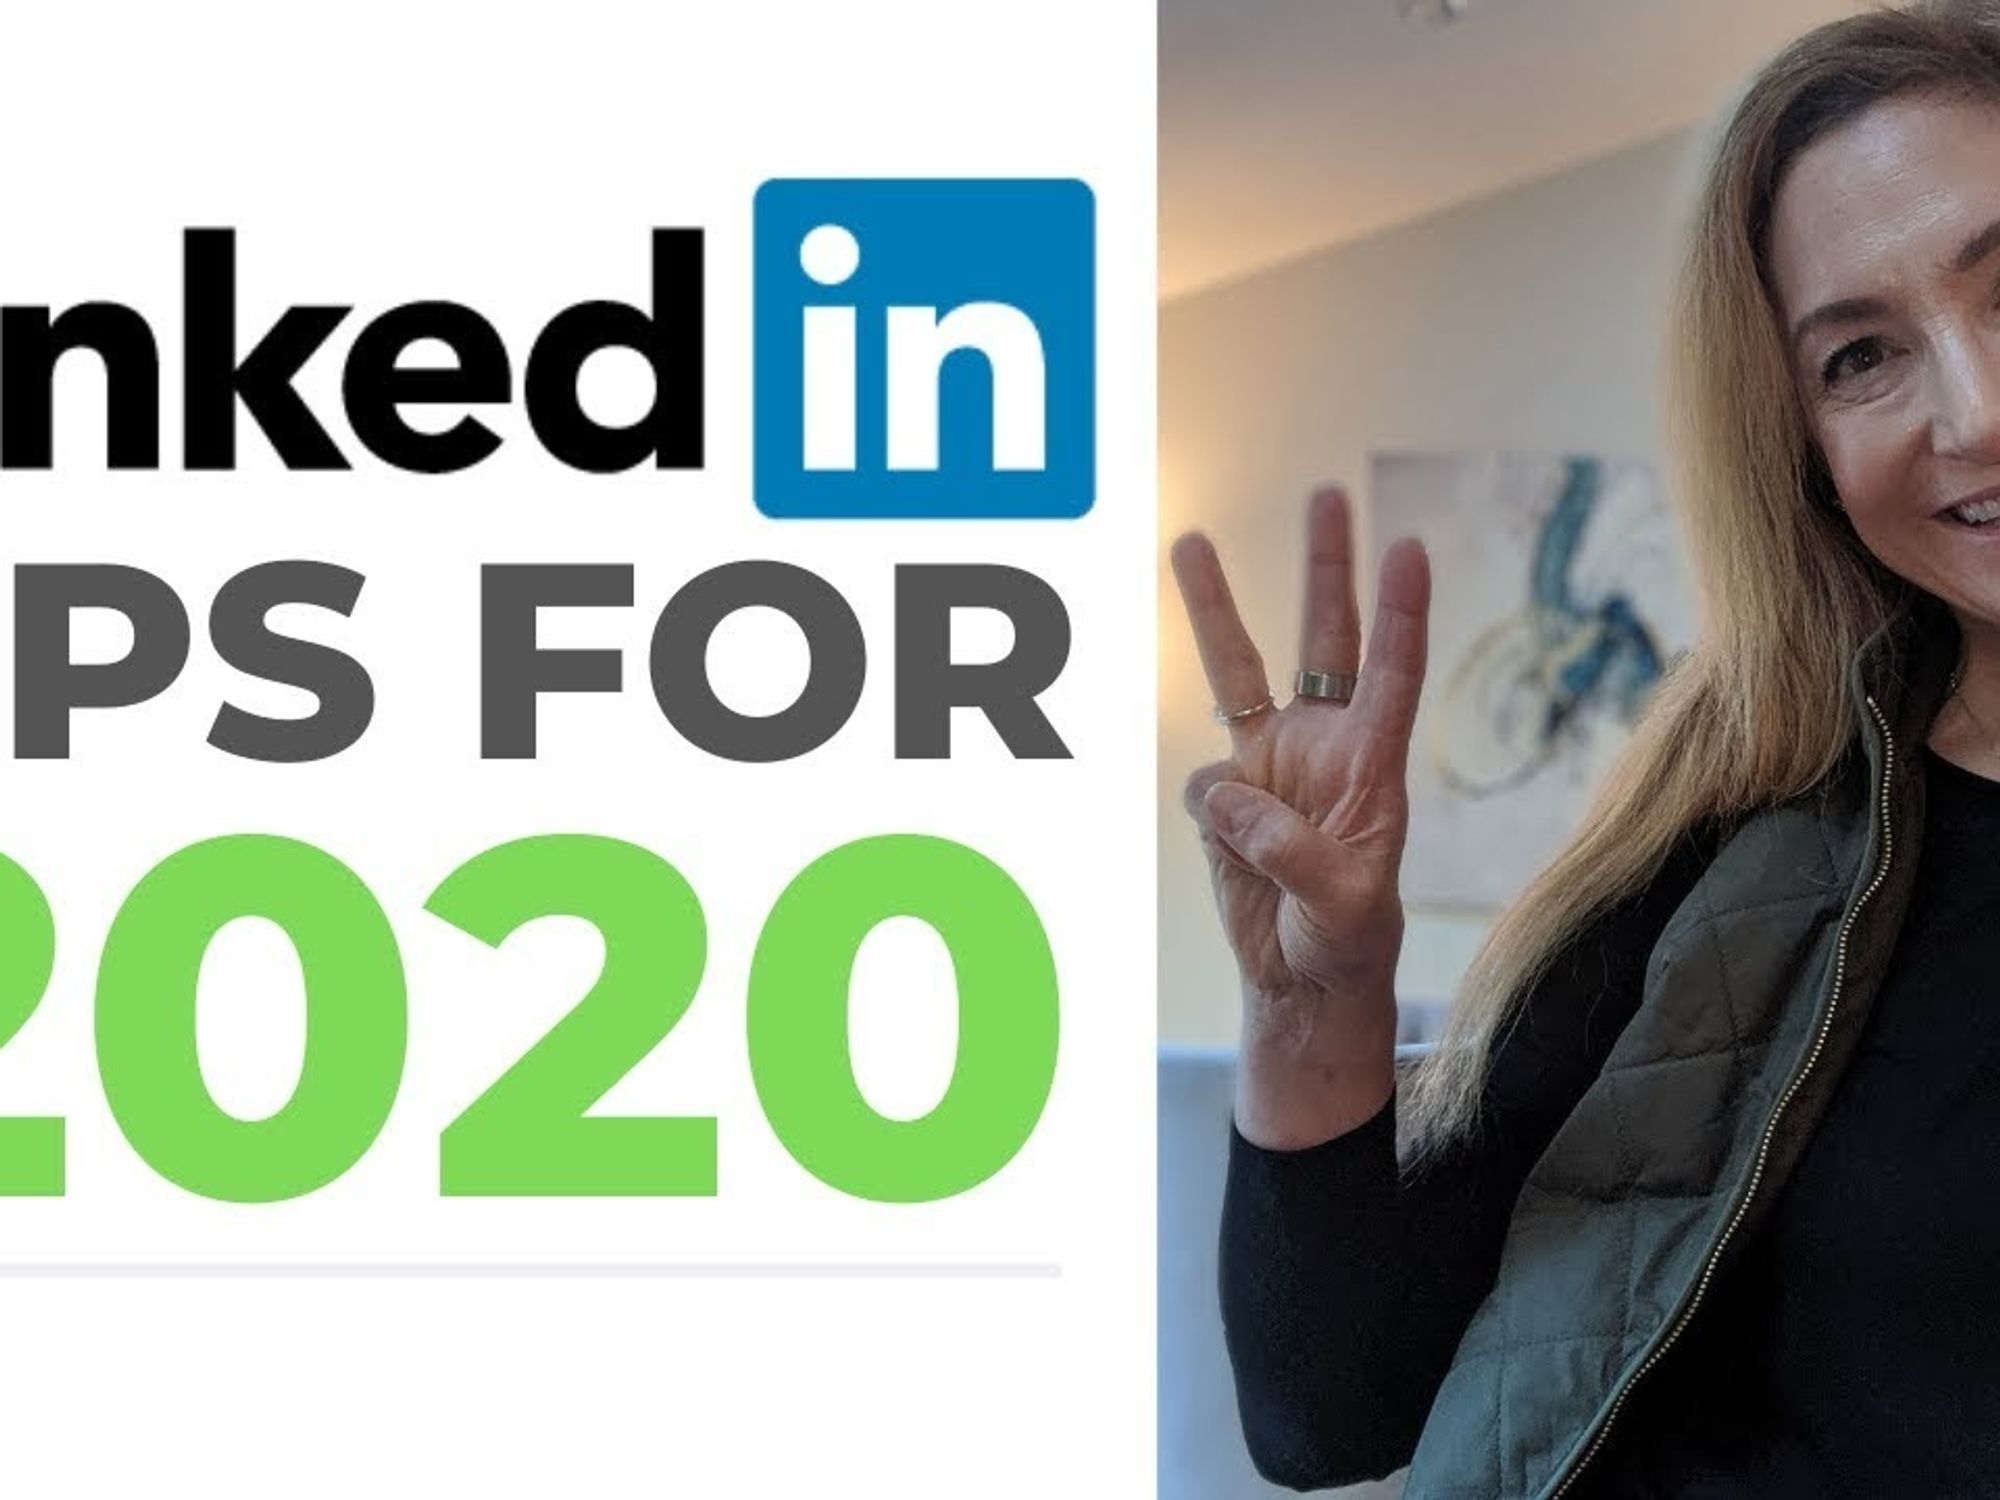 LinkedIn In 2020: 3 Things You Should Be Doing